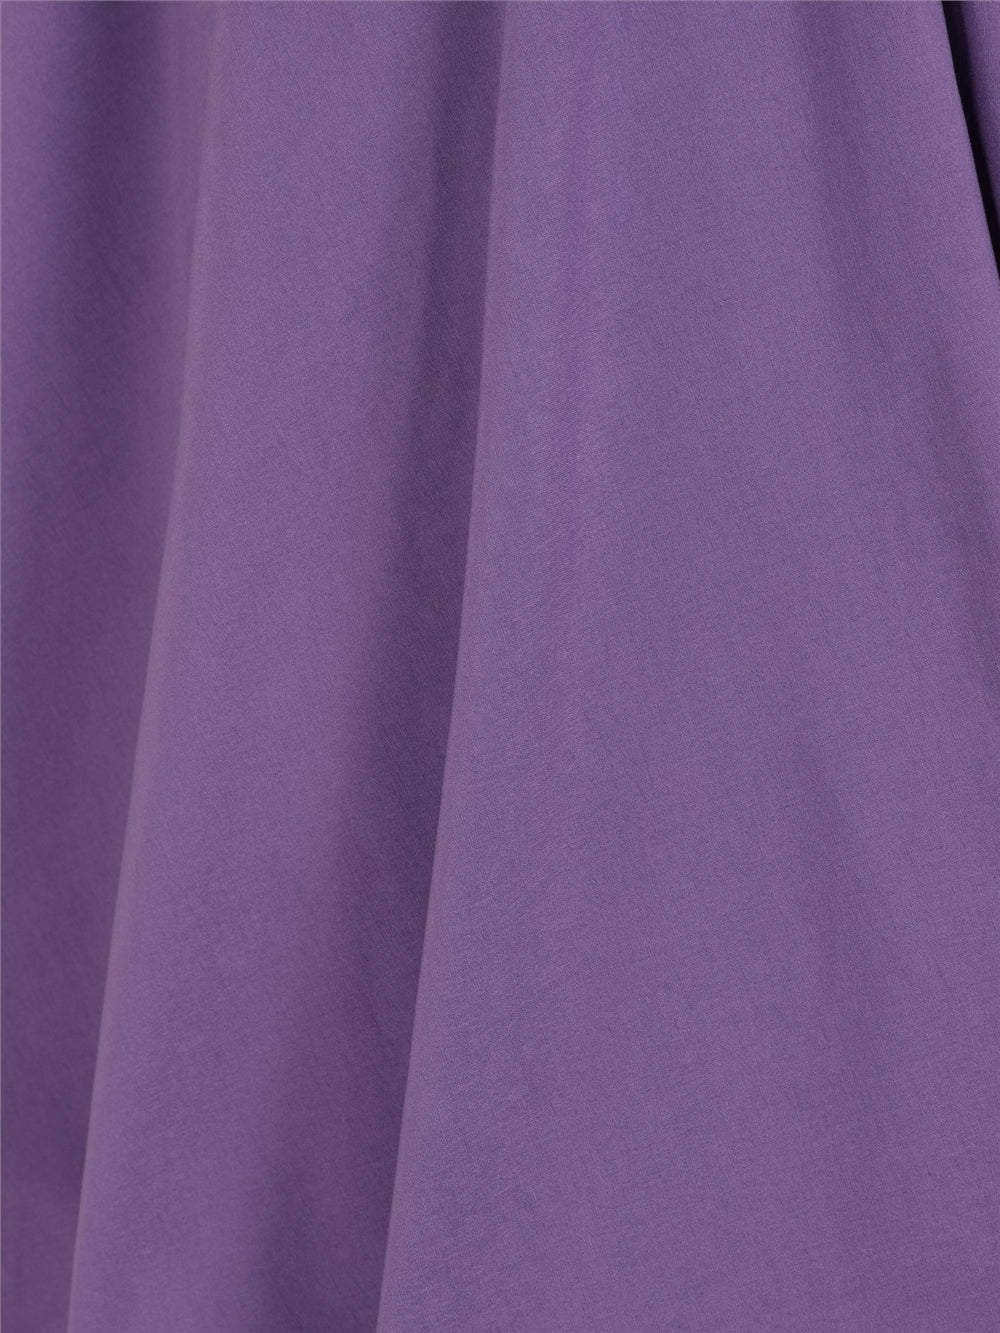 Ridly Plain Swing Dress in Purple by Collectif